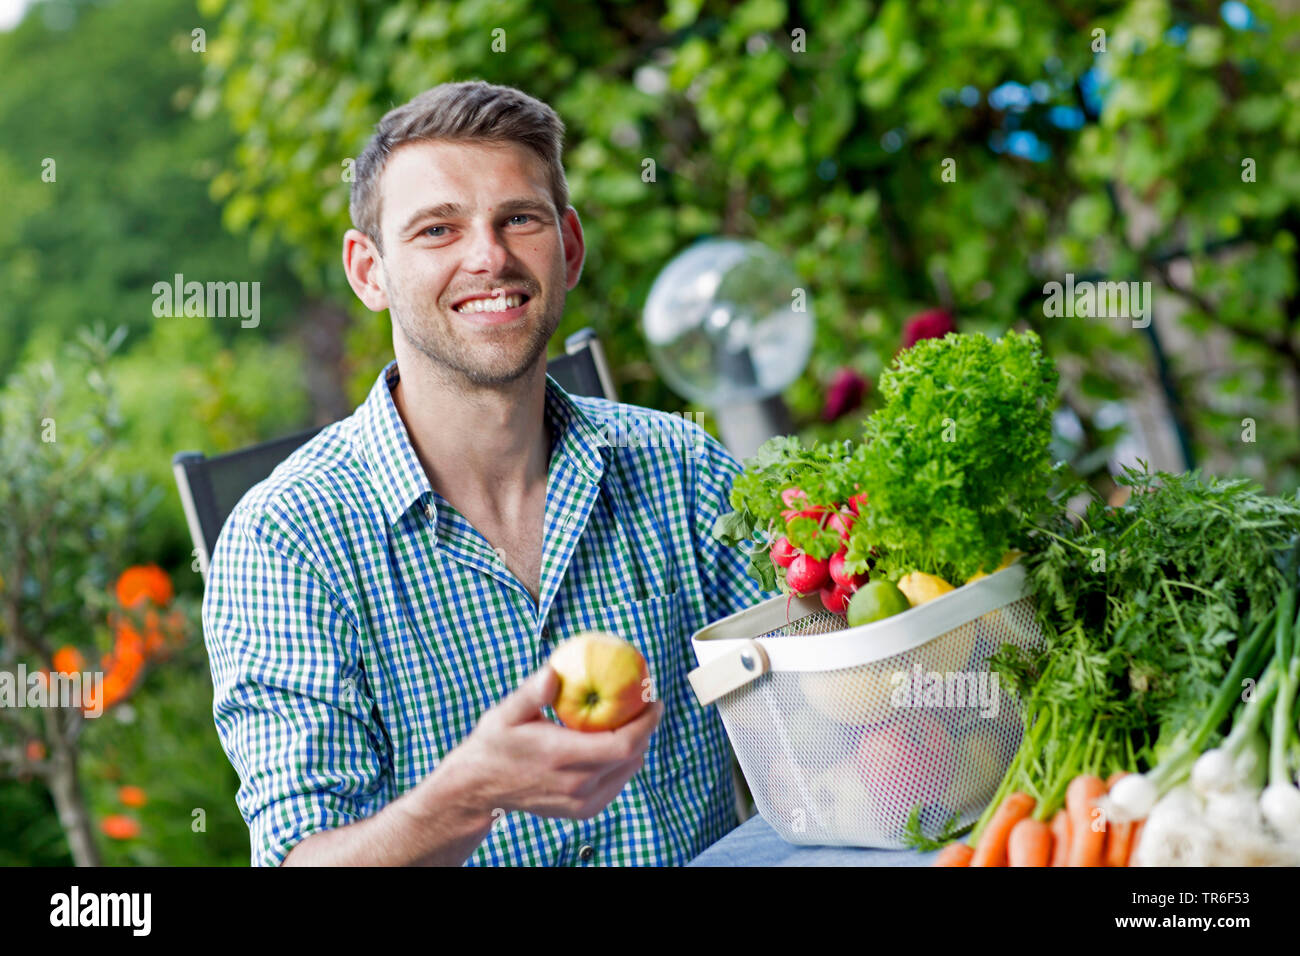 young man with fruit and vegetable basket, Germany Stock Photo